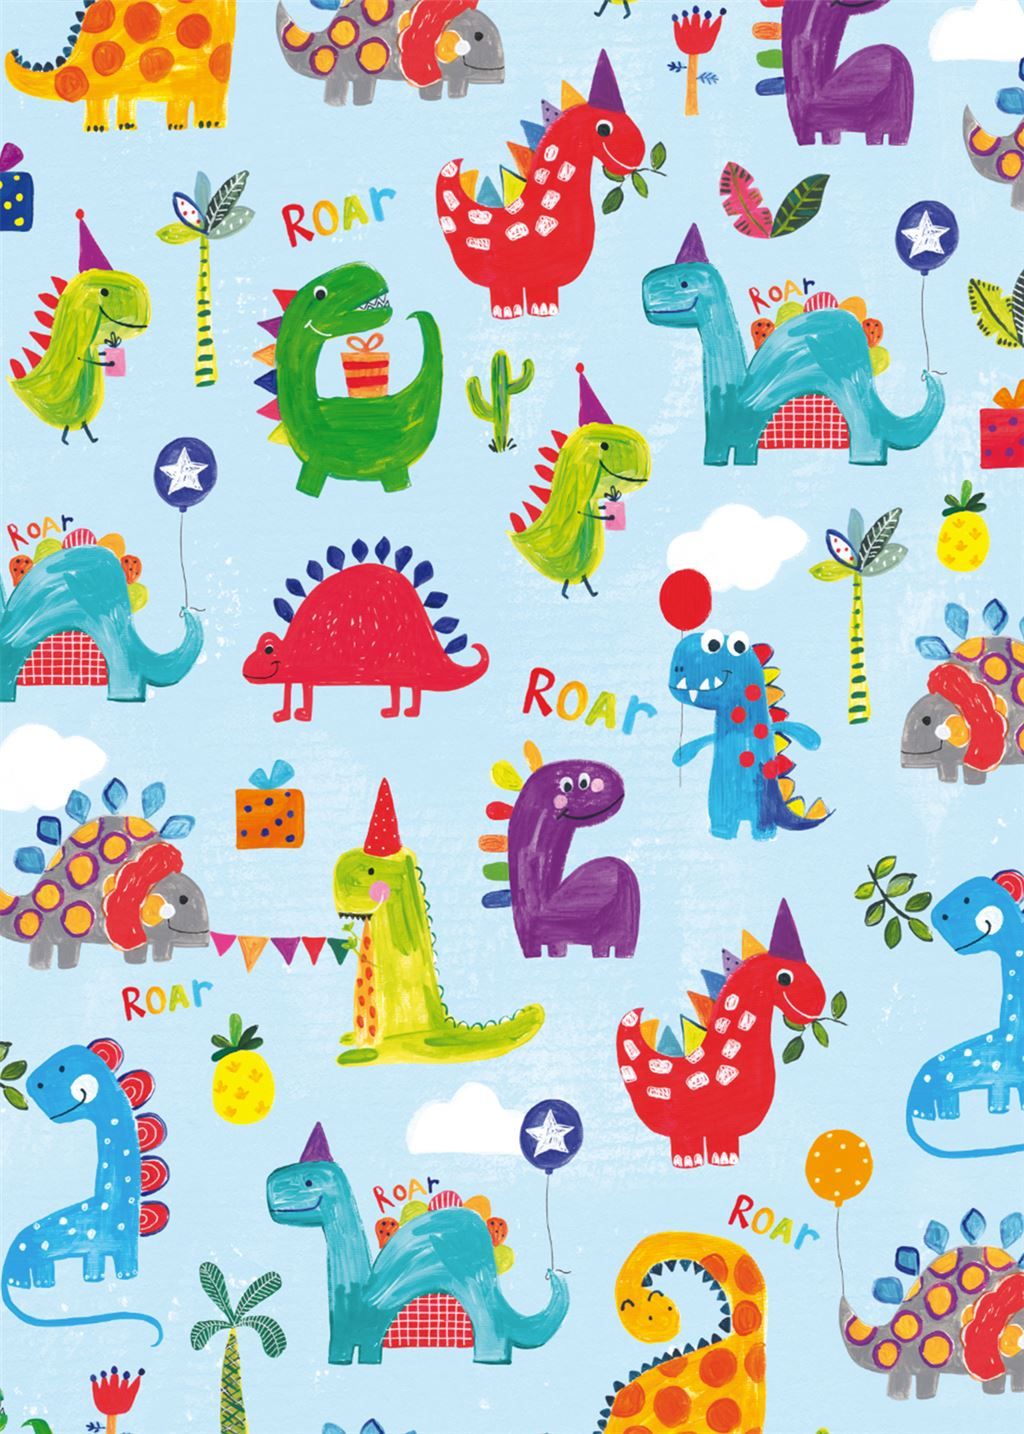 Cute Dinosaurs With Balloons Birthday Wrapping Paper - 2 SHEETS Of LUXURY G